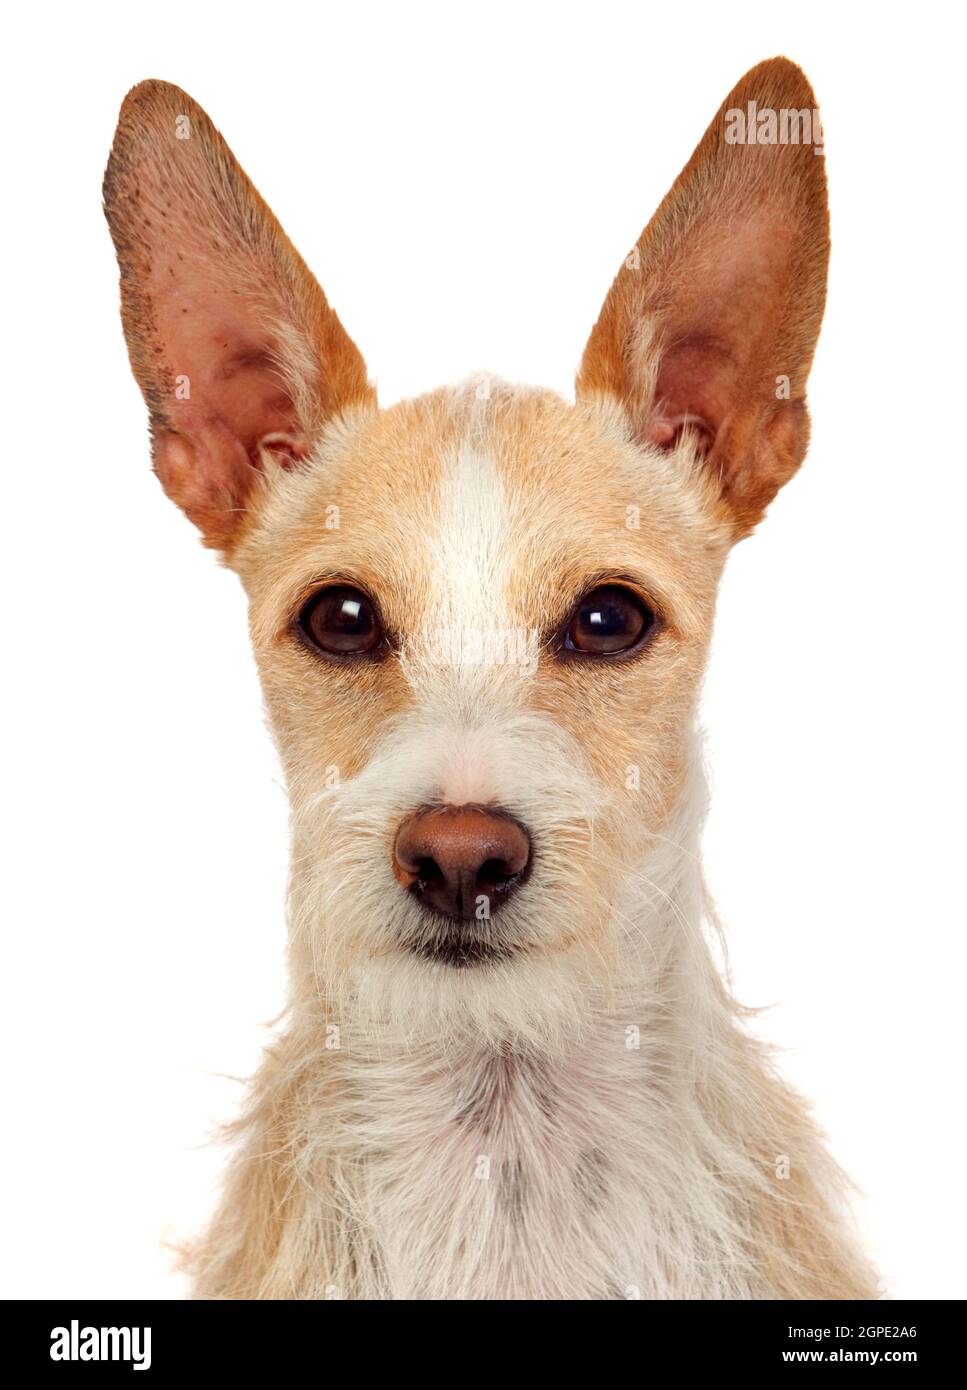 Portrait of a funny dog with big ears isolated on a white background Stock Photo